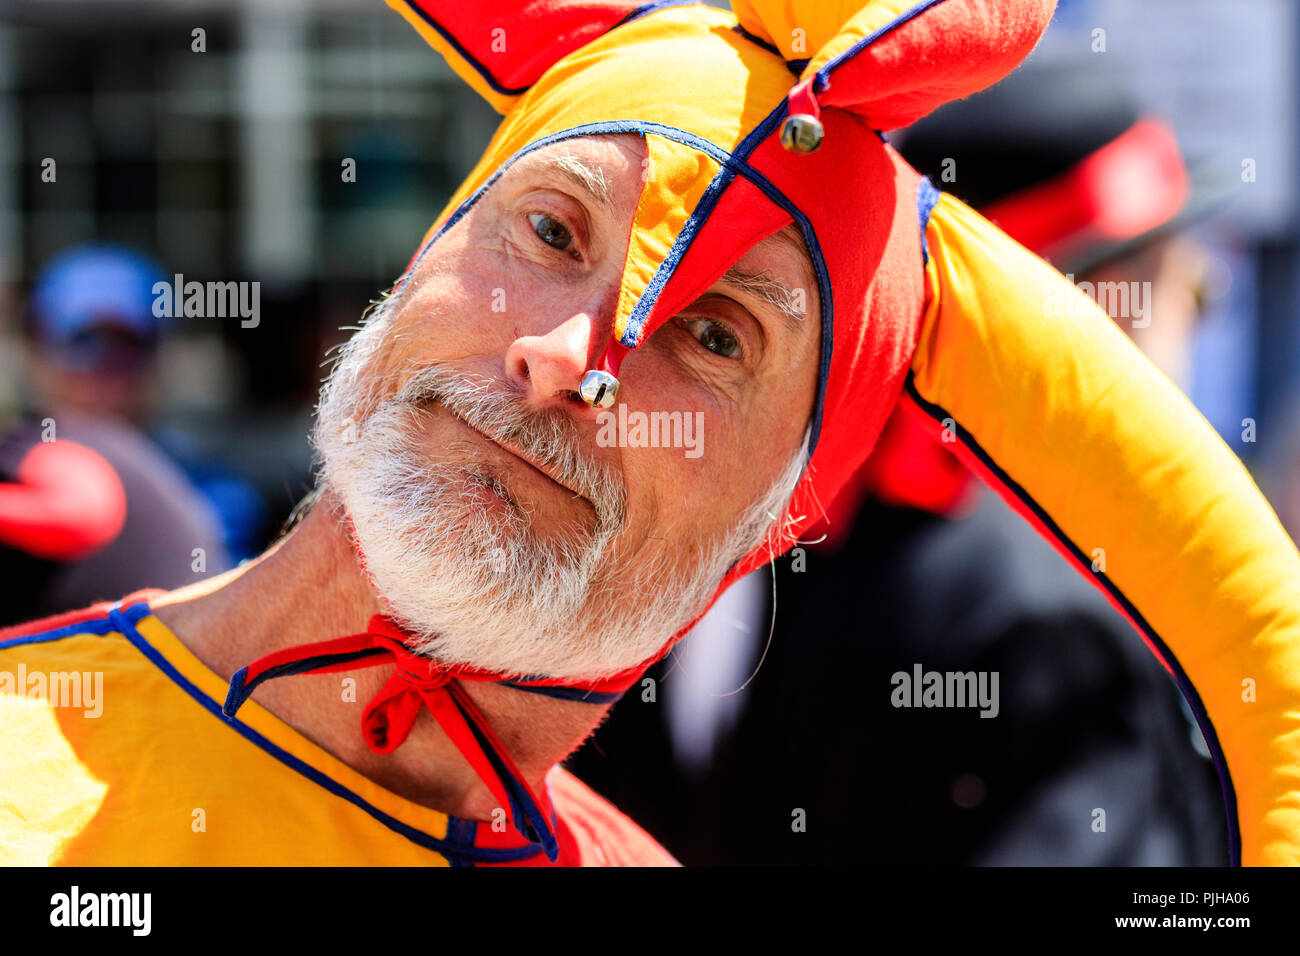 Mature man in orange and yellow medieval costume, court jester, clown. Close up of face, as he looks directly at viewer, eye contact, grey beard. Stock Photo